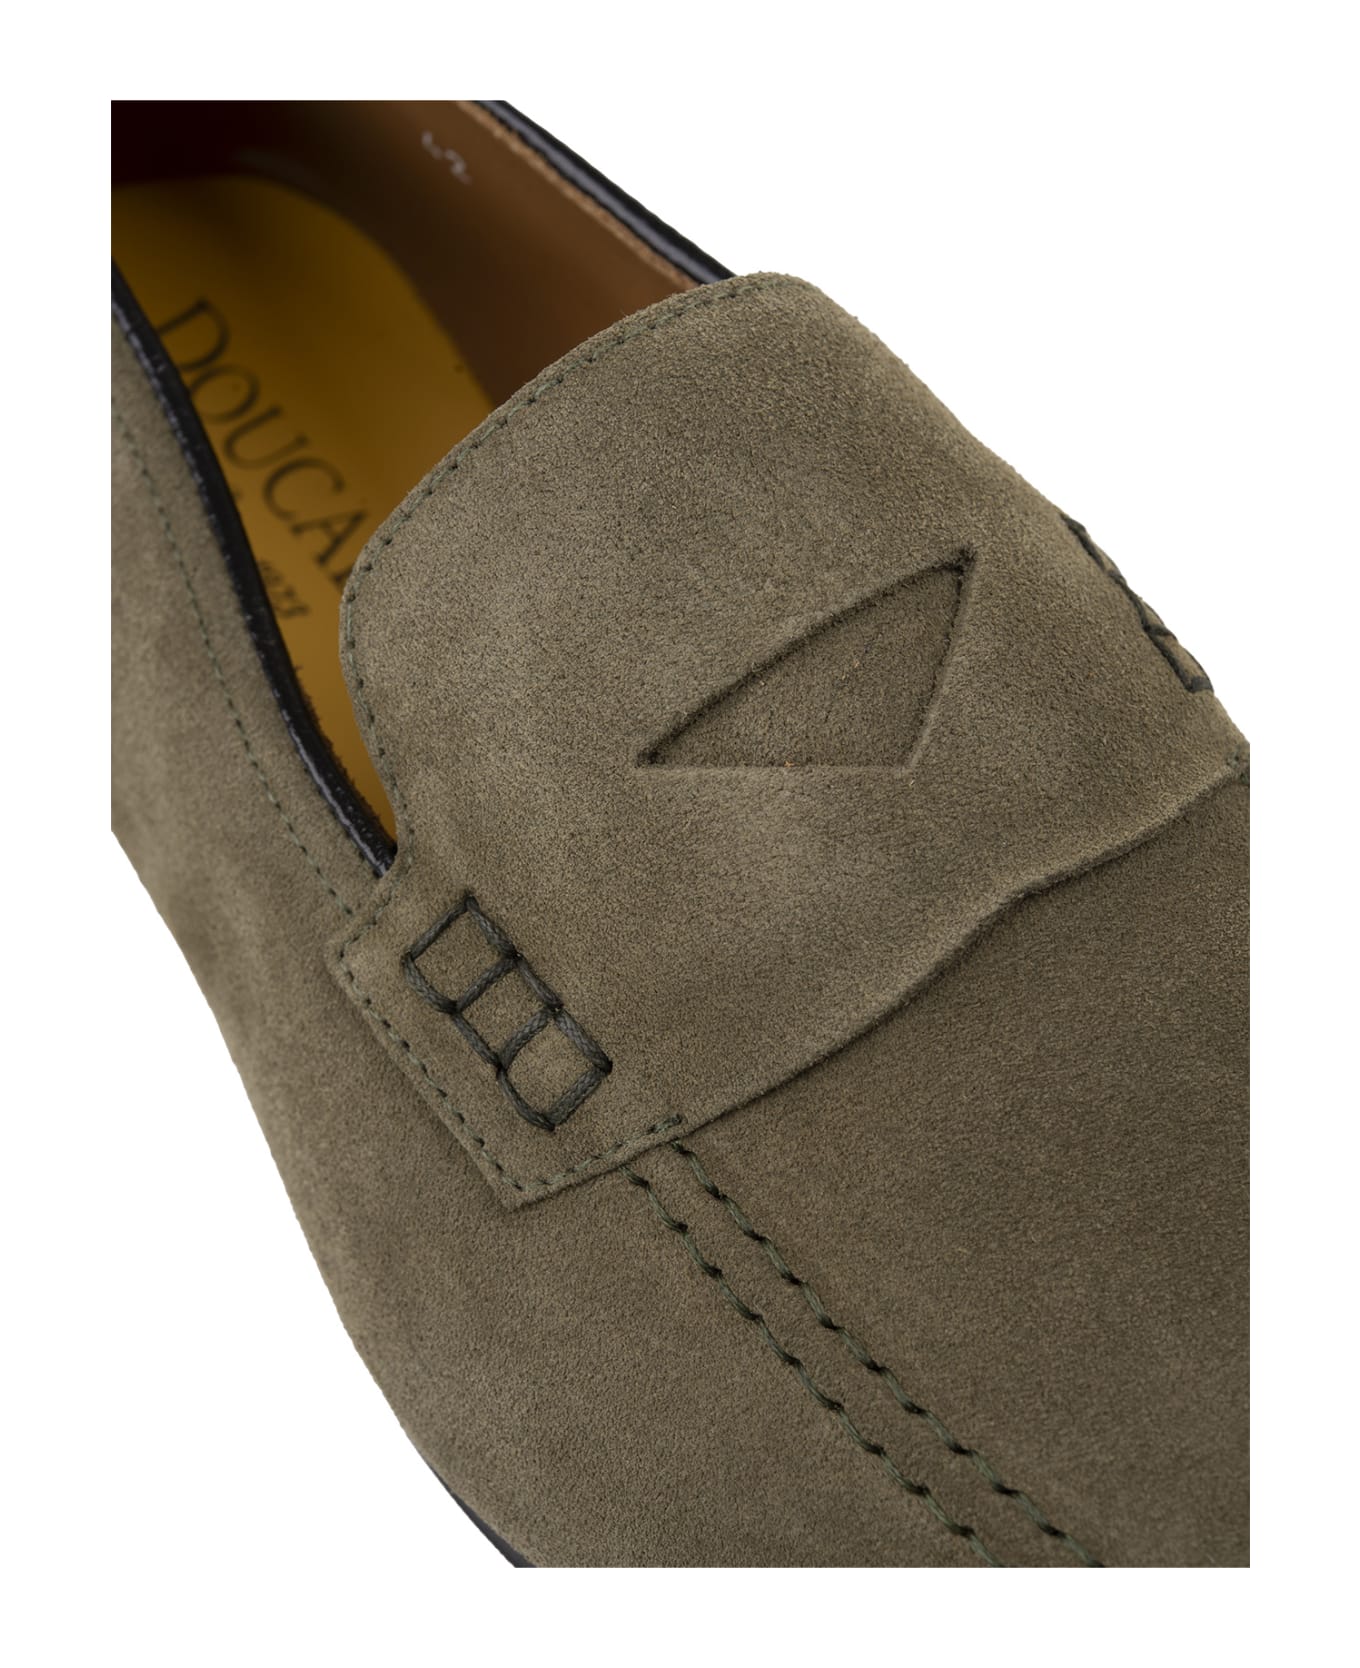 Doucal's Green Suede Penny Loafers - Green